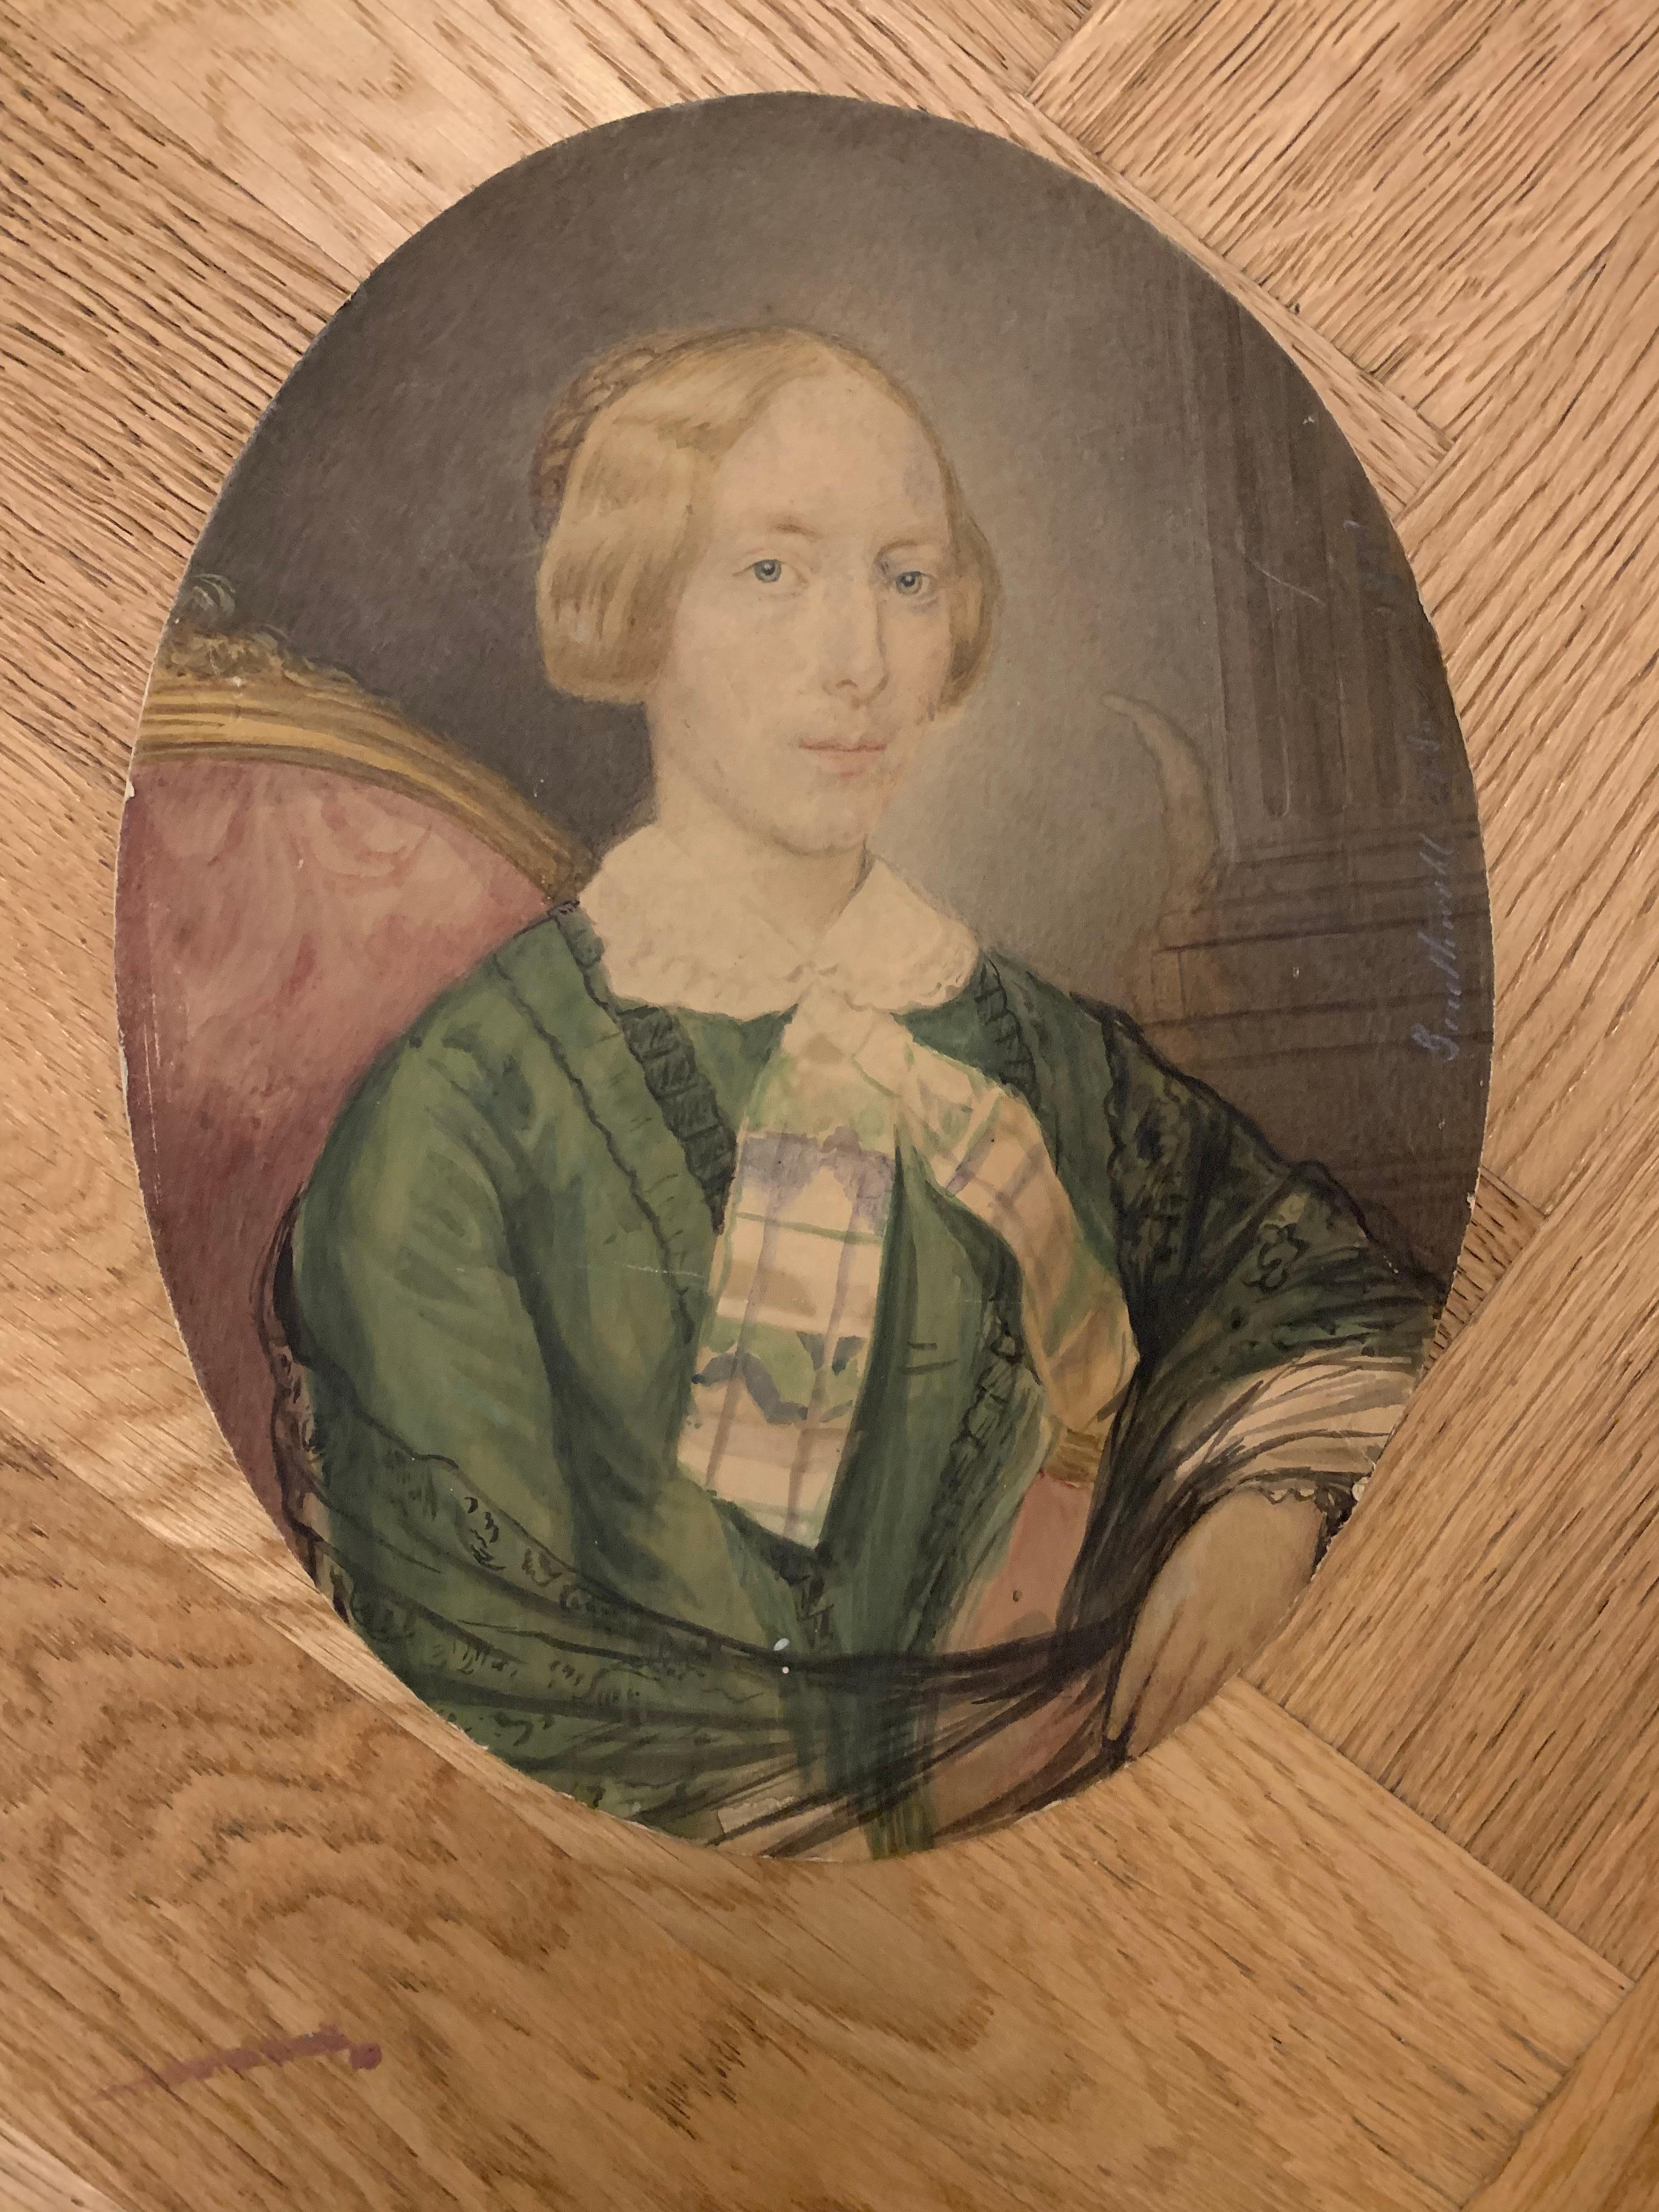 Portrait of blonde girl with green dress on paper. Dated 1851.
Technique: watercolor and pencil on painter's cardboard.
Some defects ( please see photos). 
Partially legible signature on the right edge in the center.
Date 1851.
Girl with Nordic